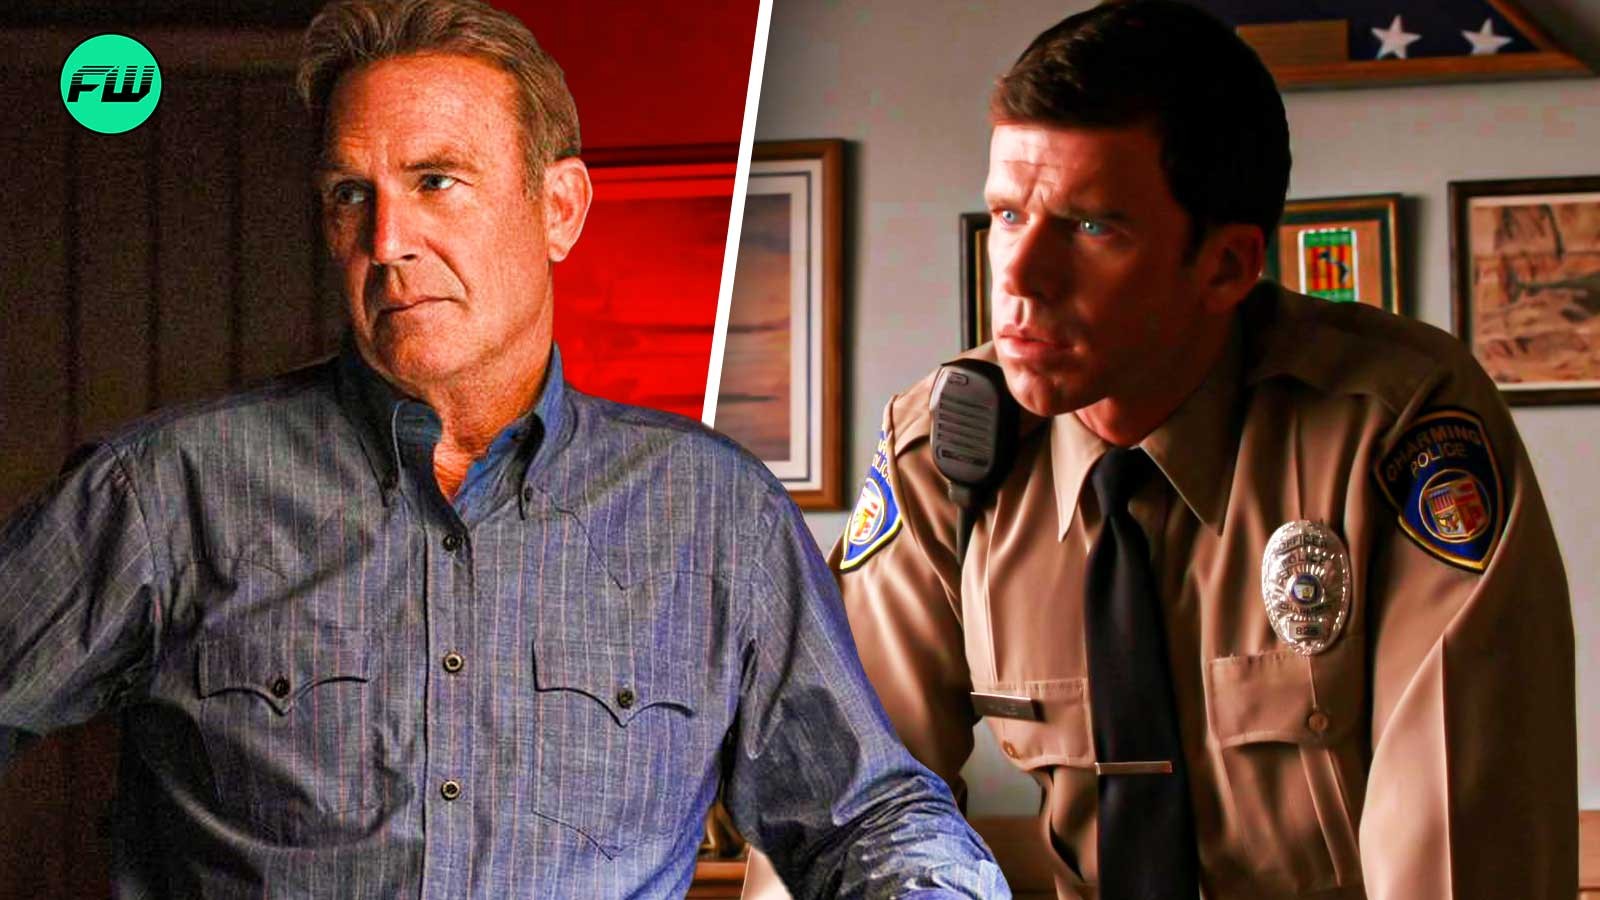 Taylor Sheridan’s only talent lured Kevin Costner to “Yellowstone,” and the showrunner’s three highest-rated films explain why